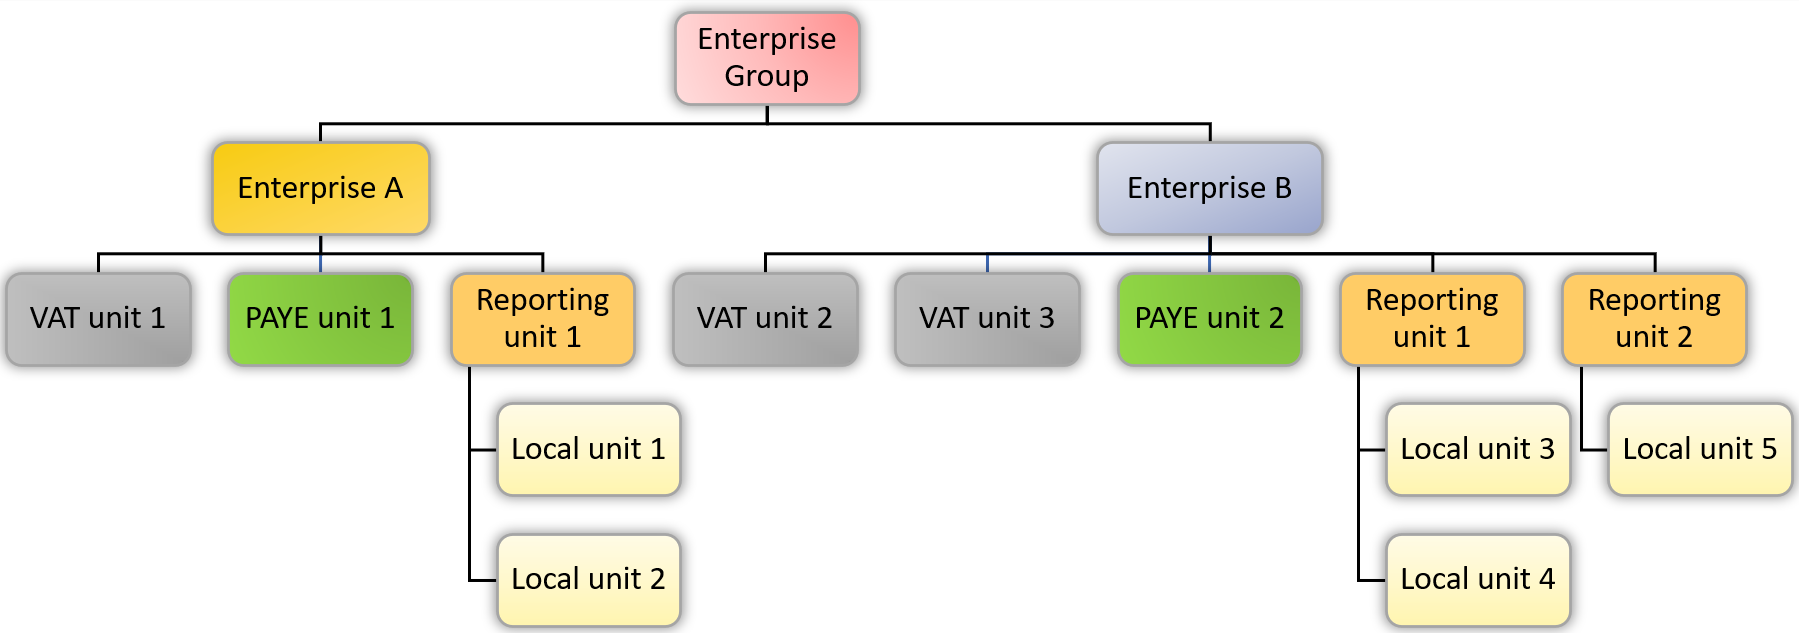 An example of a firm that has a complex structure in the Inter-departmental Business Register